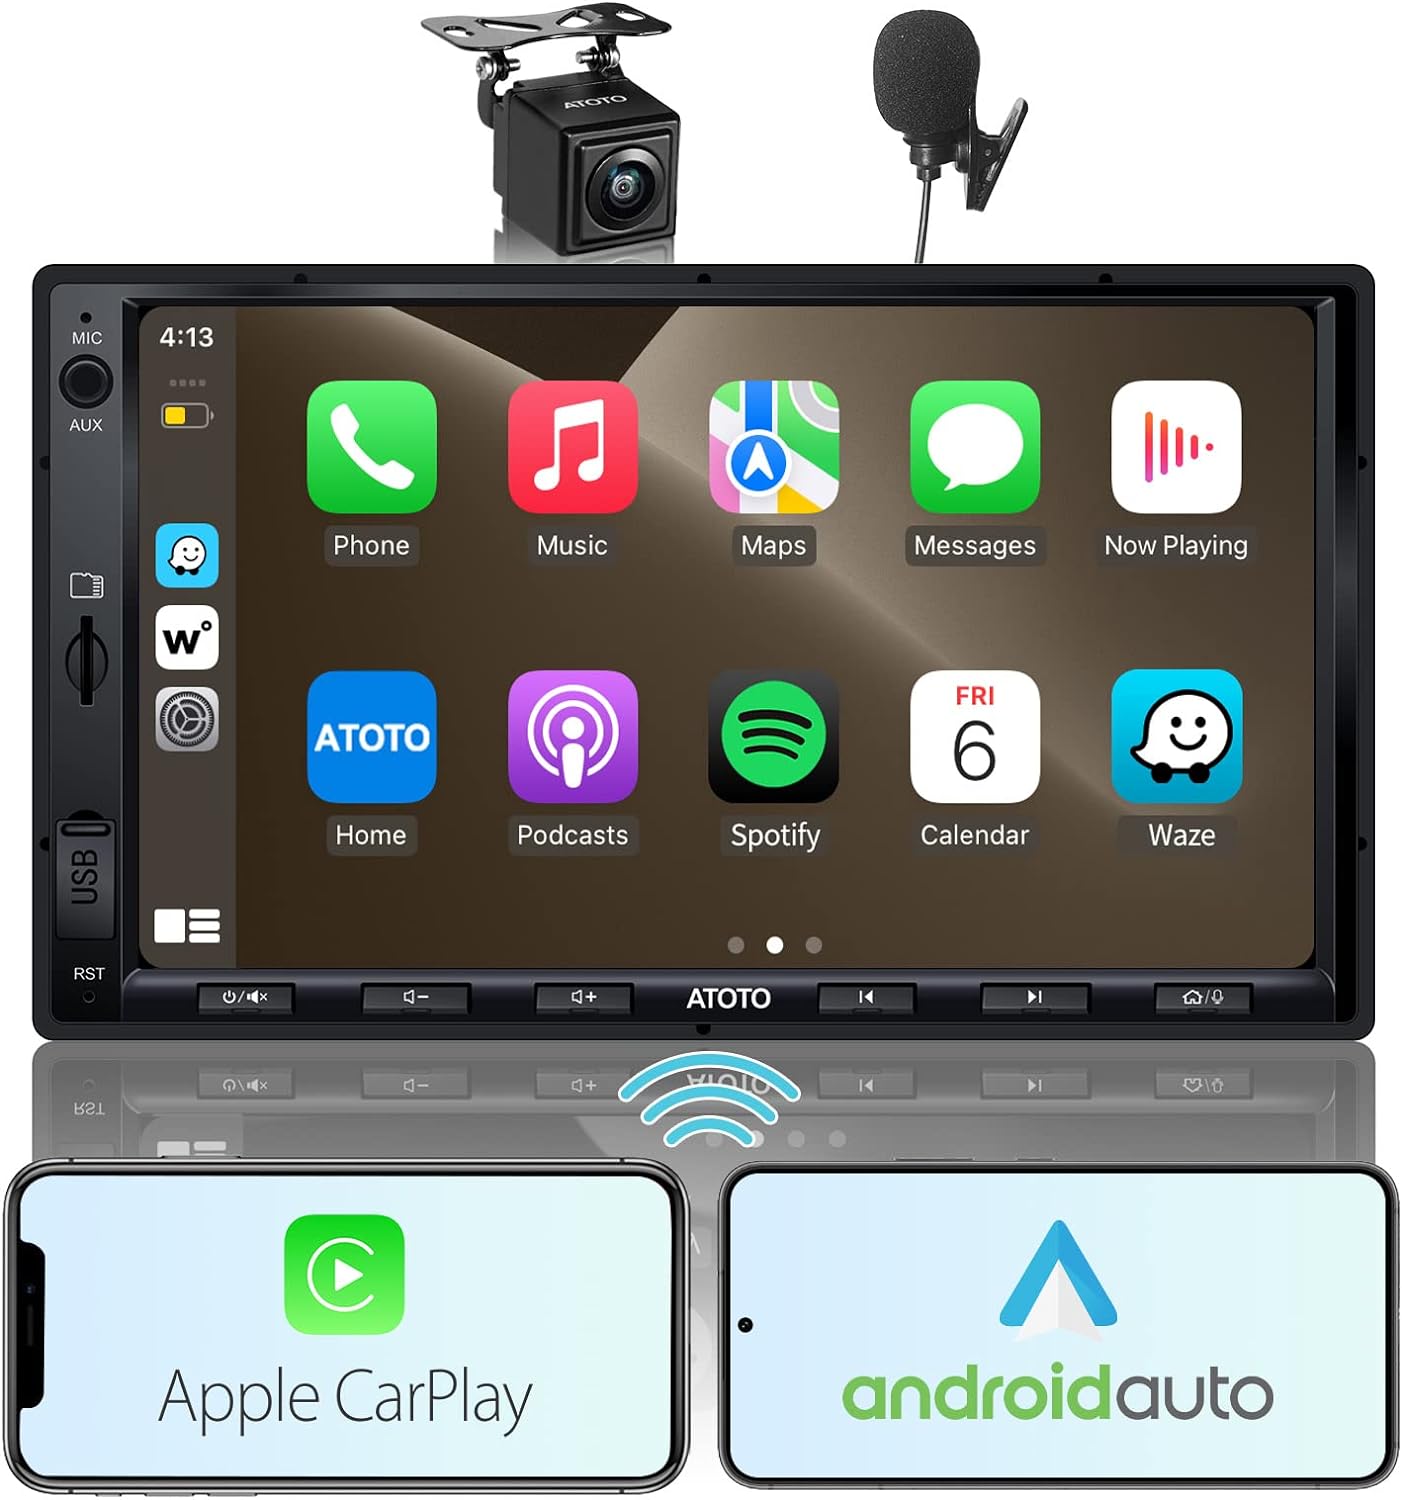 [Upgrade] ATOTO Double Din Car Stereo with Wireless CarPlay,Wireless Android Auto,7in IPS Touchscreen,Bluetooth,Phone Mirroring,HD LRV Camera,USB Video & Audio,F7G2A7WE-S01